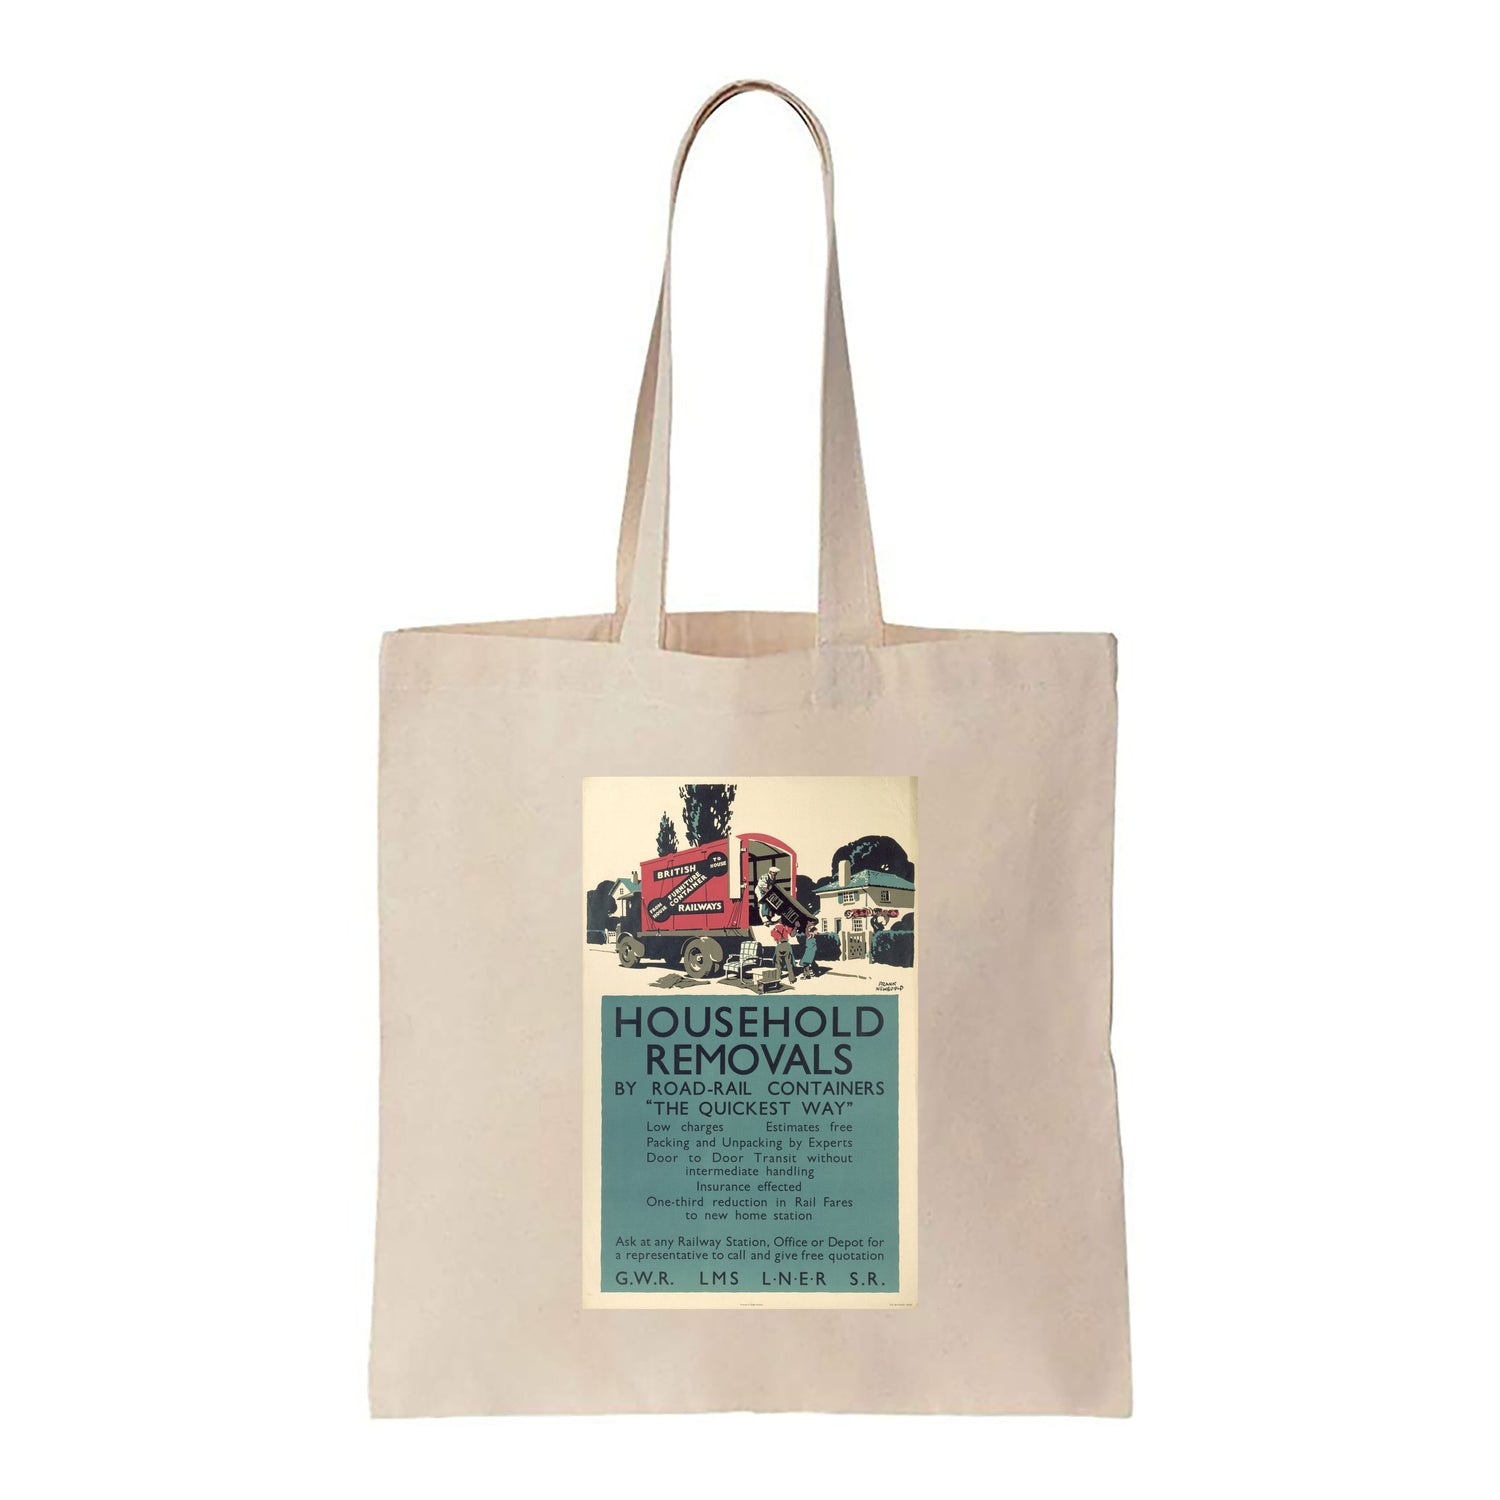 Household Removals By Road-Rail Containers, "The Quickest Way" - Canvas Tote Bag